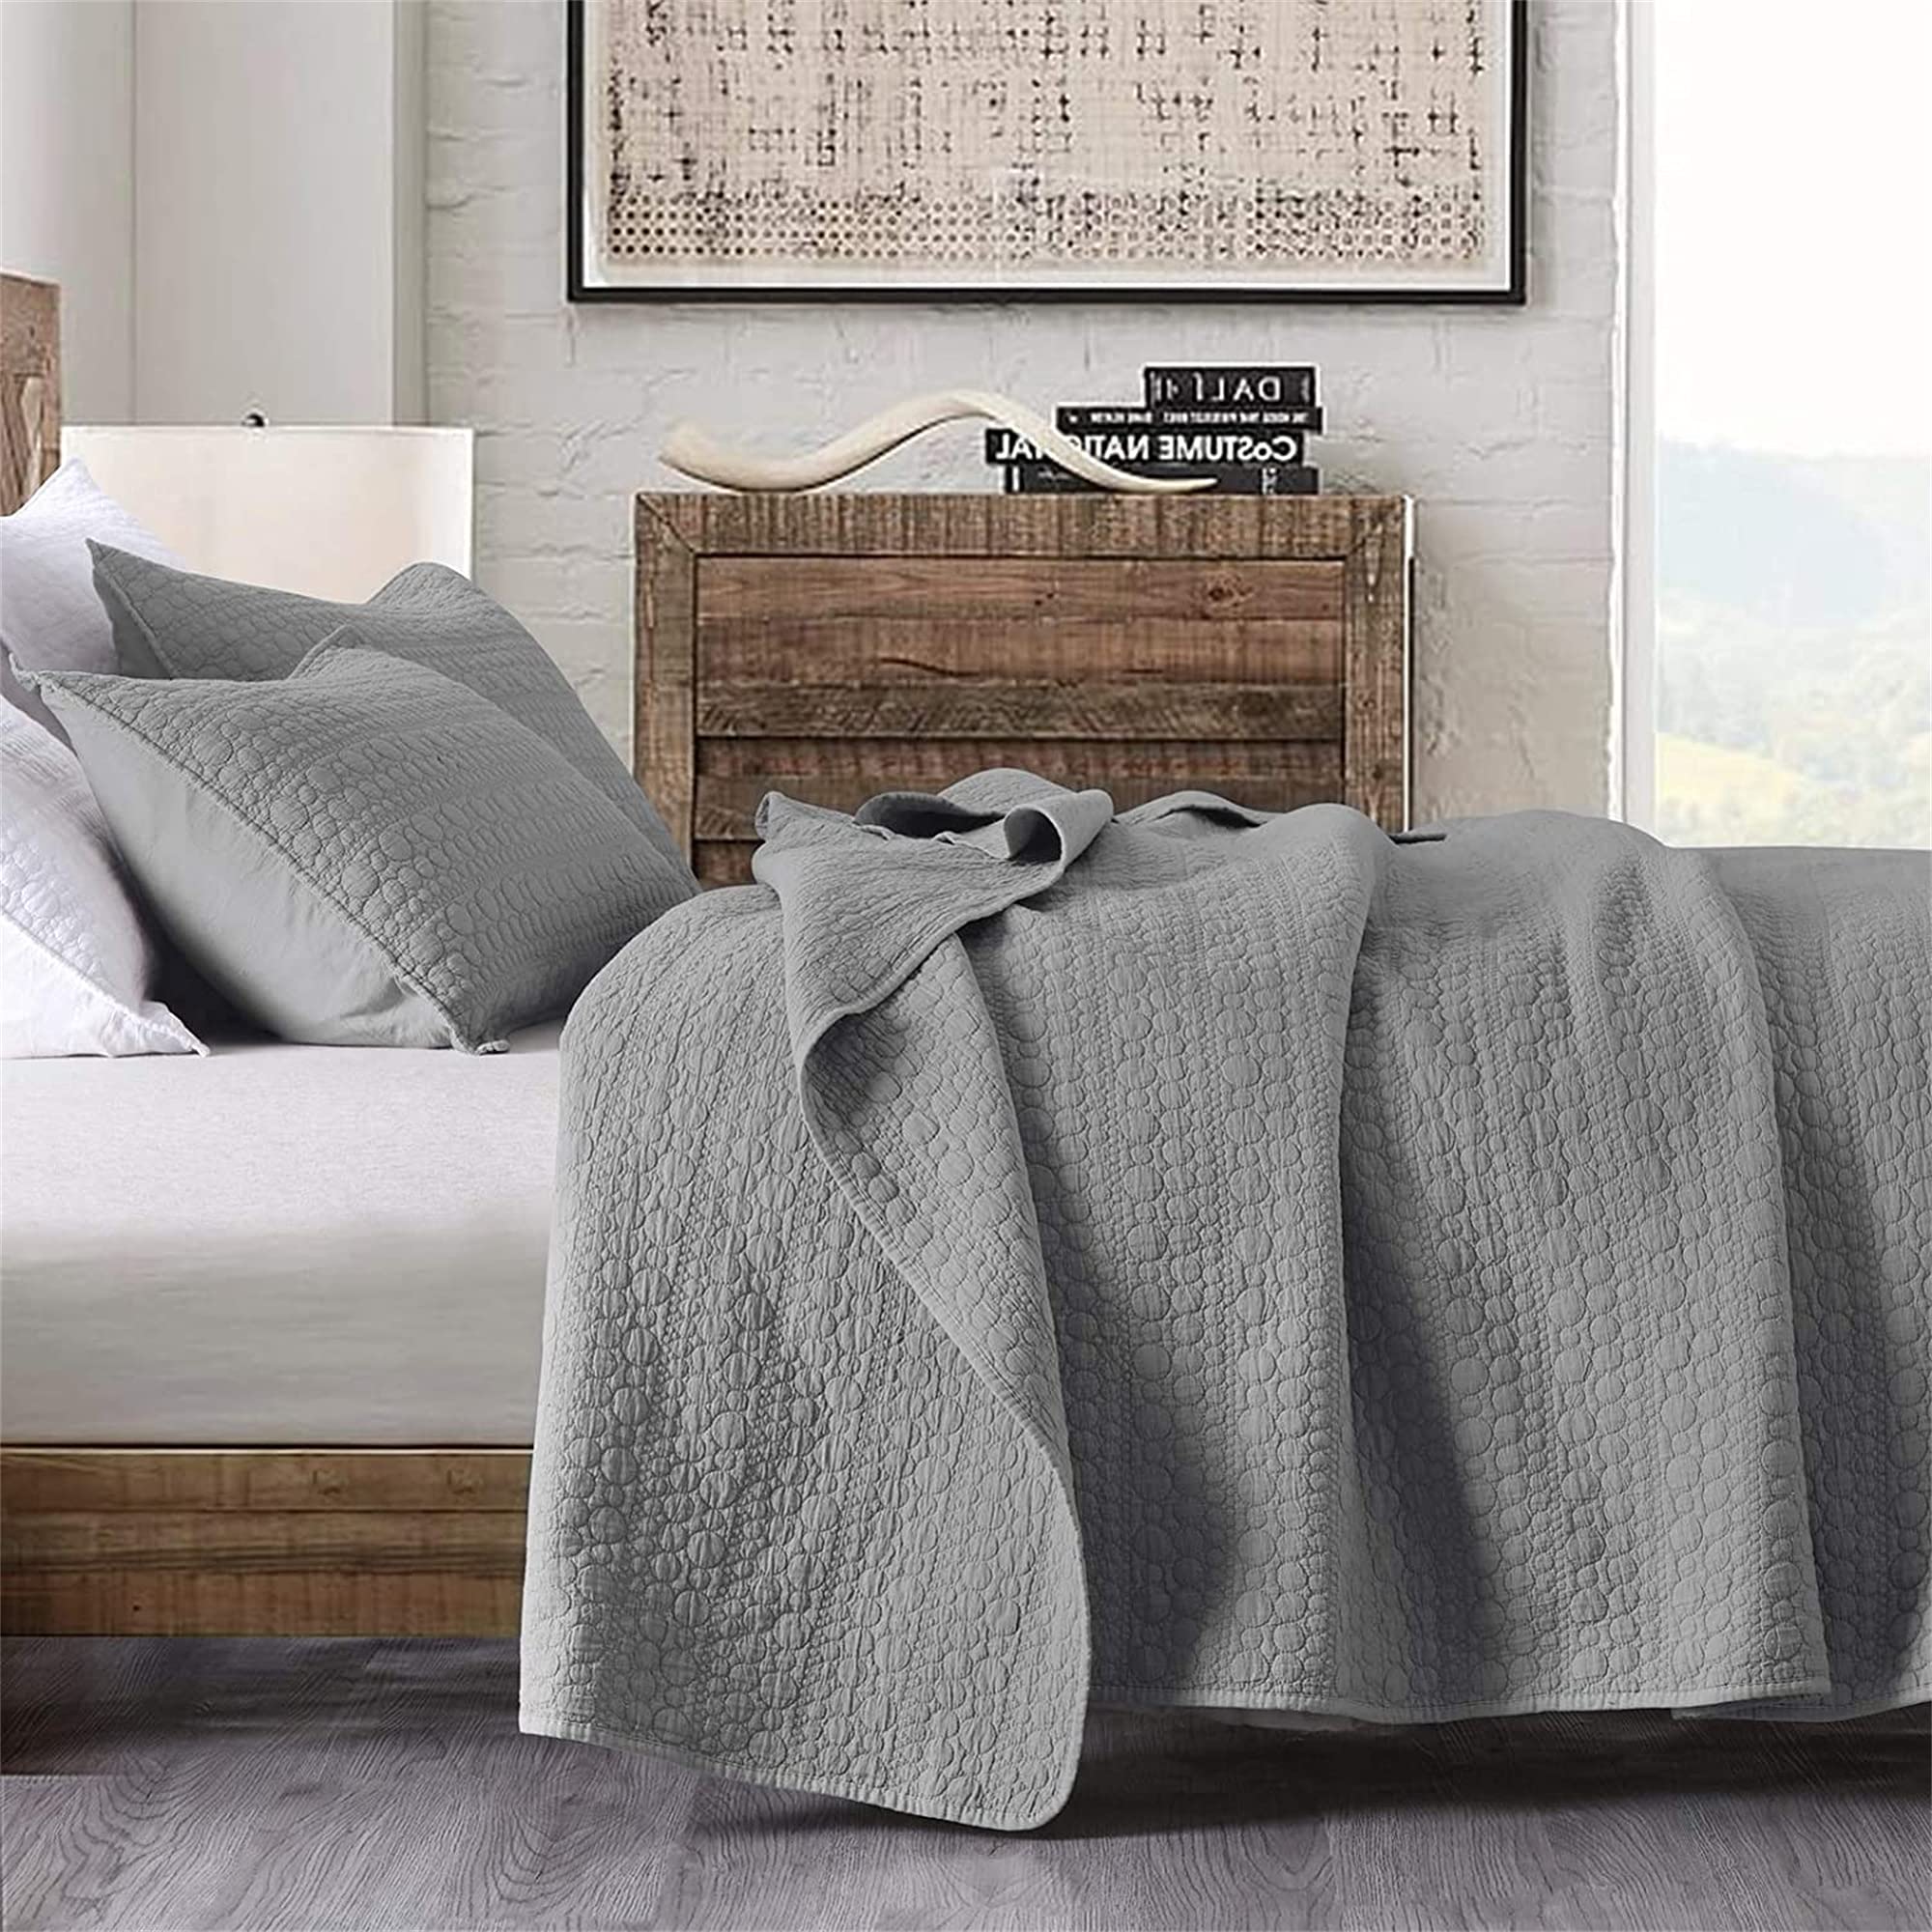 HORIMOTE HOME Bedspread SuperKing Size Grey, Classic Geometric Spots Stitched Pattern, Stone Washed Microfiber Chic Rustic Look, Ultra Soft Lightweight Quilted Bedspread for All Season, 3pcs Set